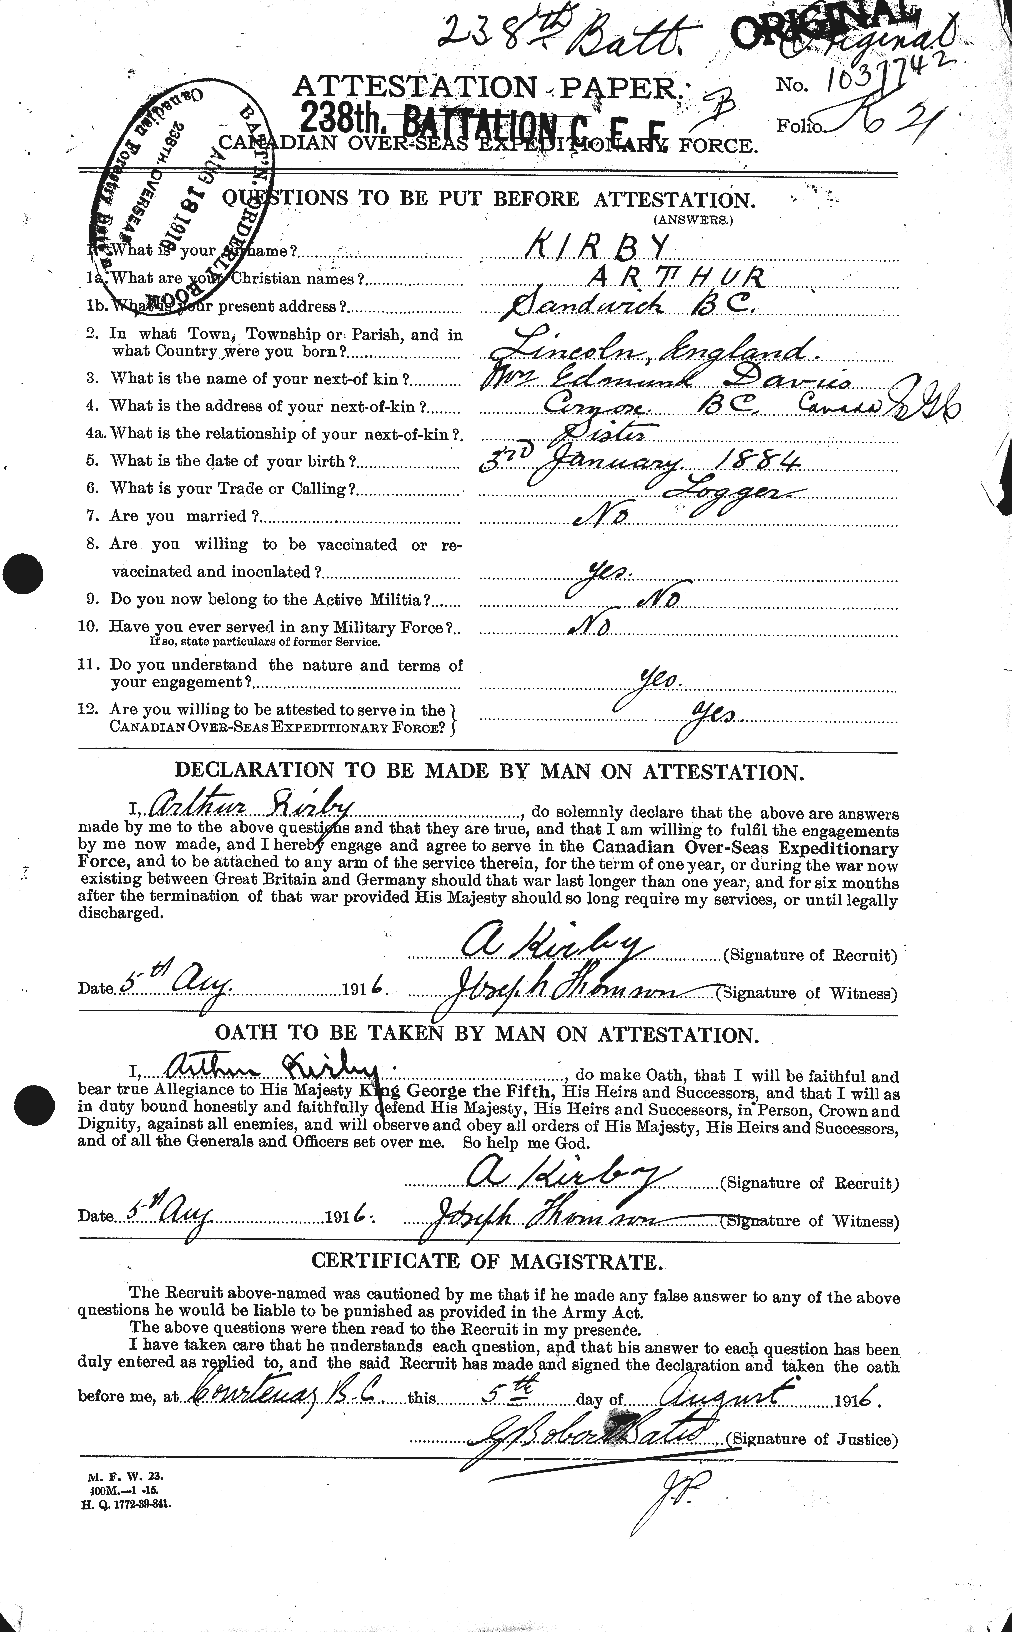 Personnel Records of the First World War - CEF 437153a